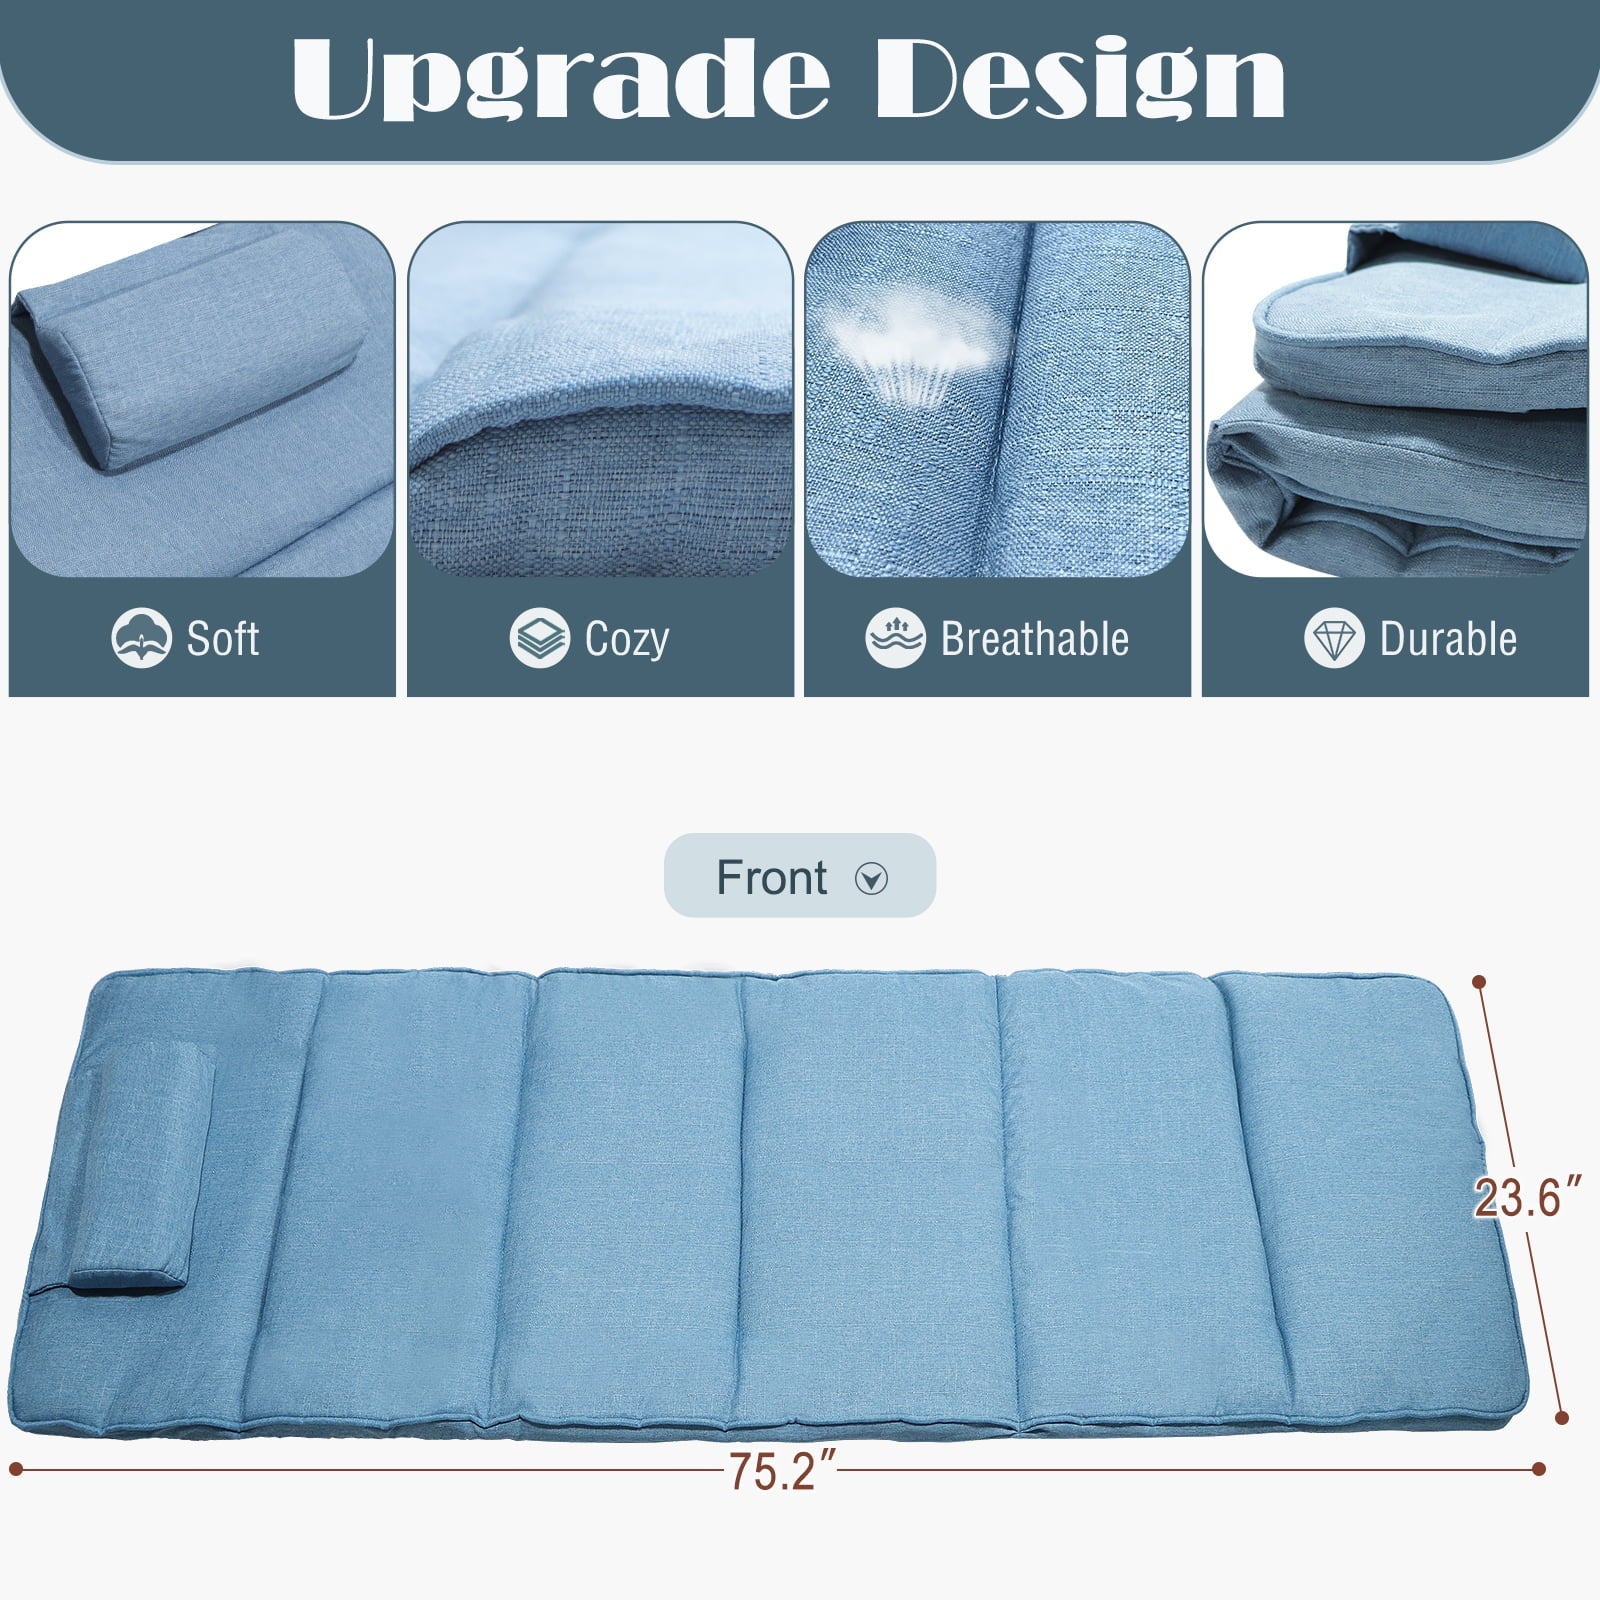 MOPHOTO Folding Bed Cot with Mattress, Portable Beds Frame with Mattress, Portable Fold Up Bed for Outdoor Travel, Foldable Bed with Frame, Sleeping Bed Cot for Adults, Blue